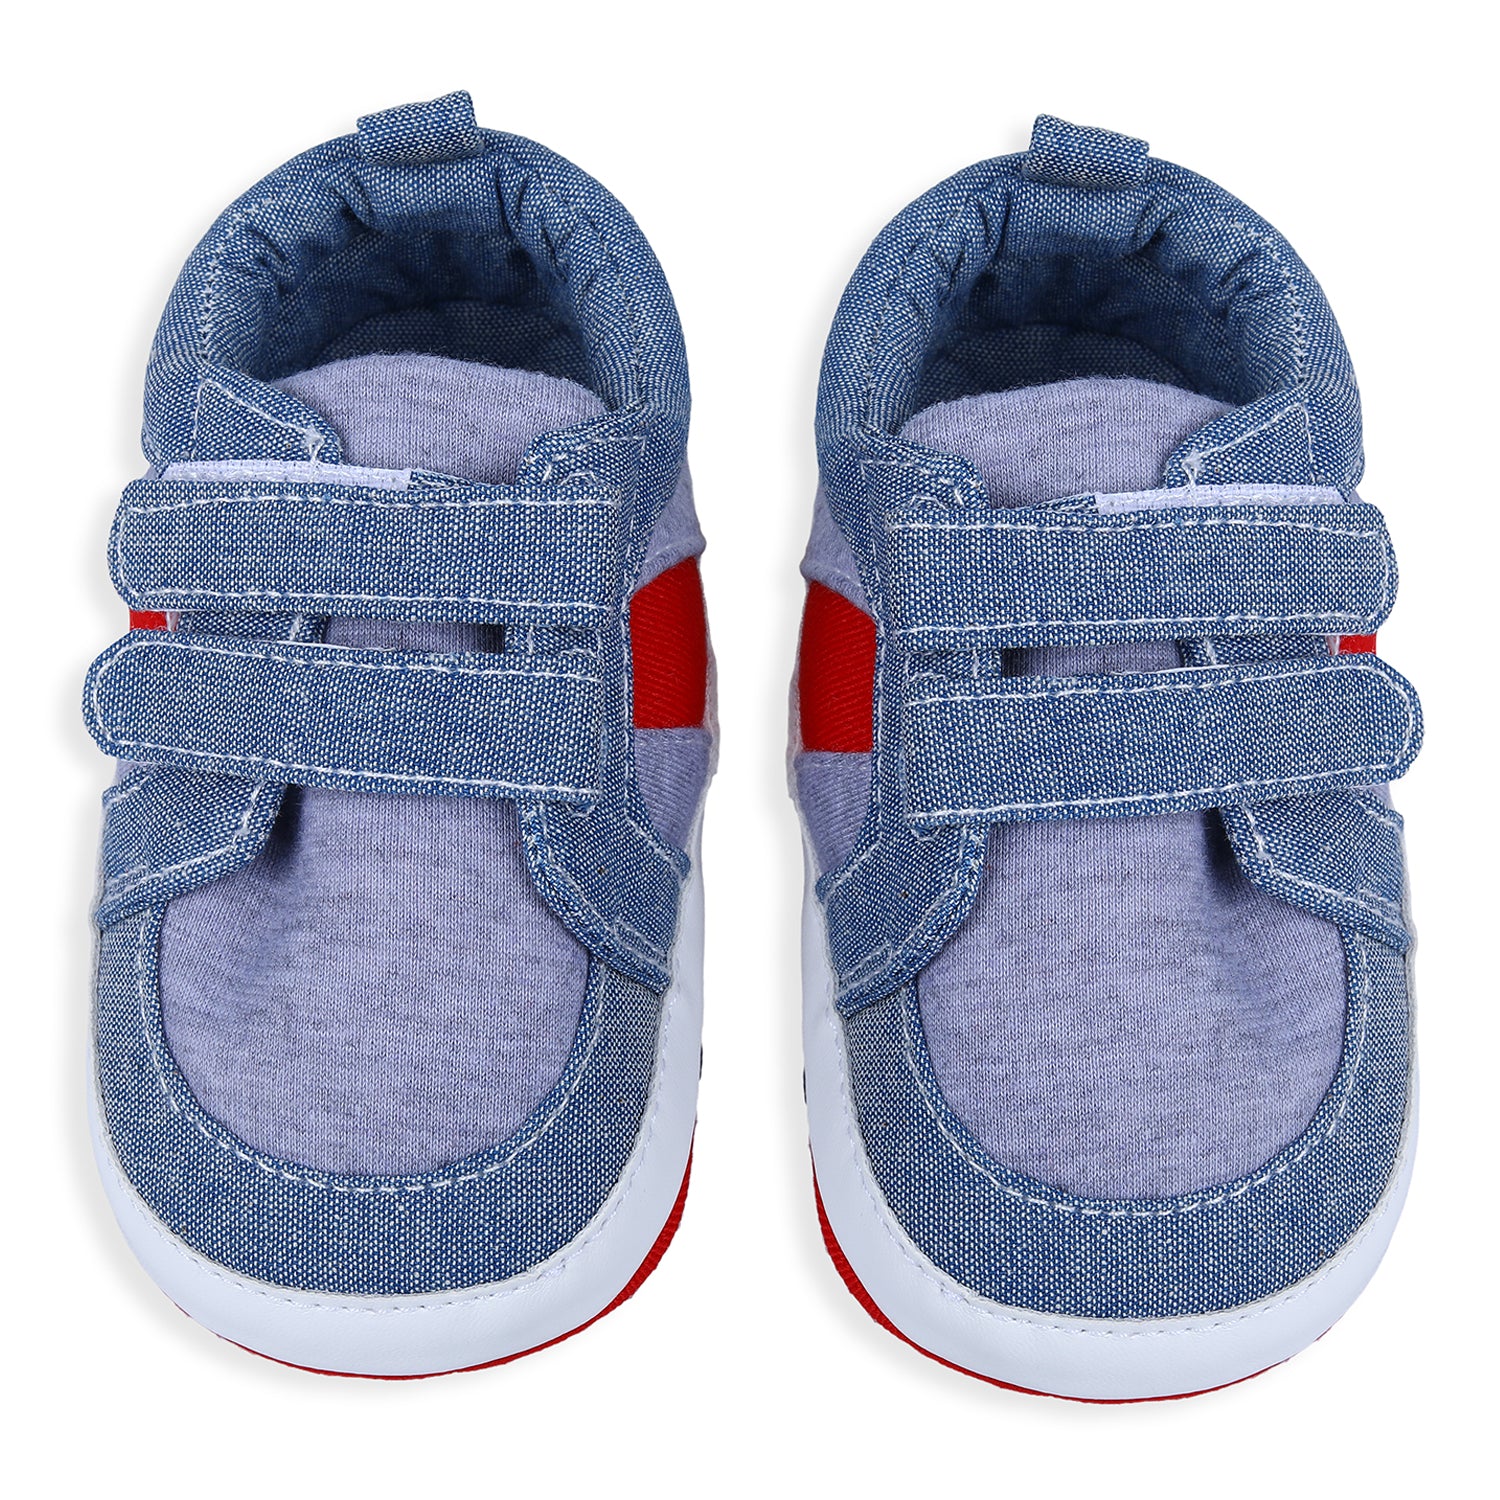 Baby Moo Colour Blocked Cute And Casual Denim Velcro Booties - Blue And Red